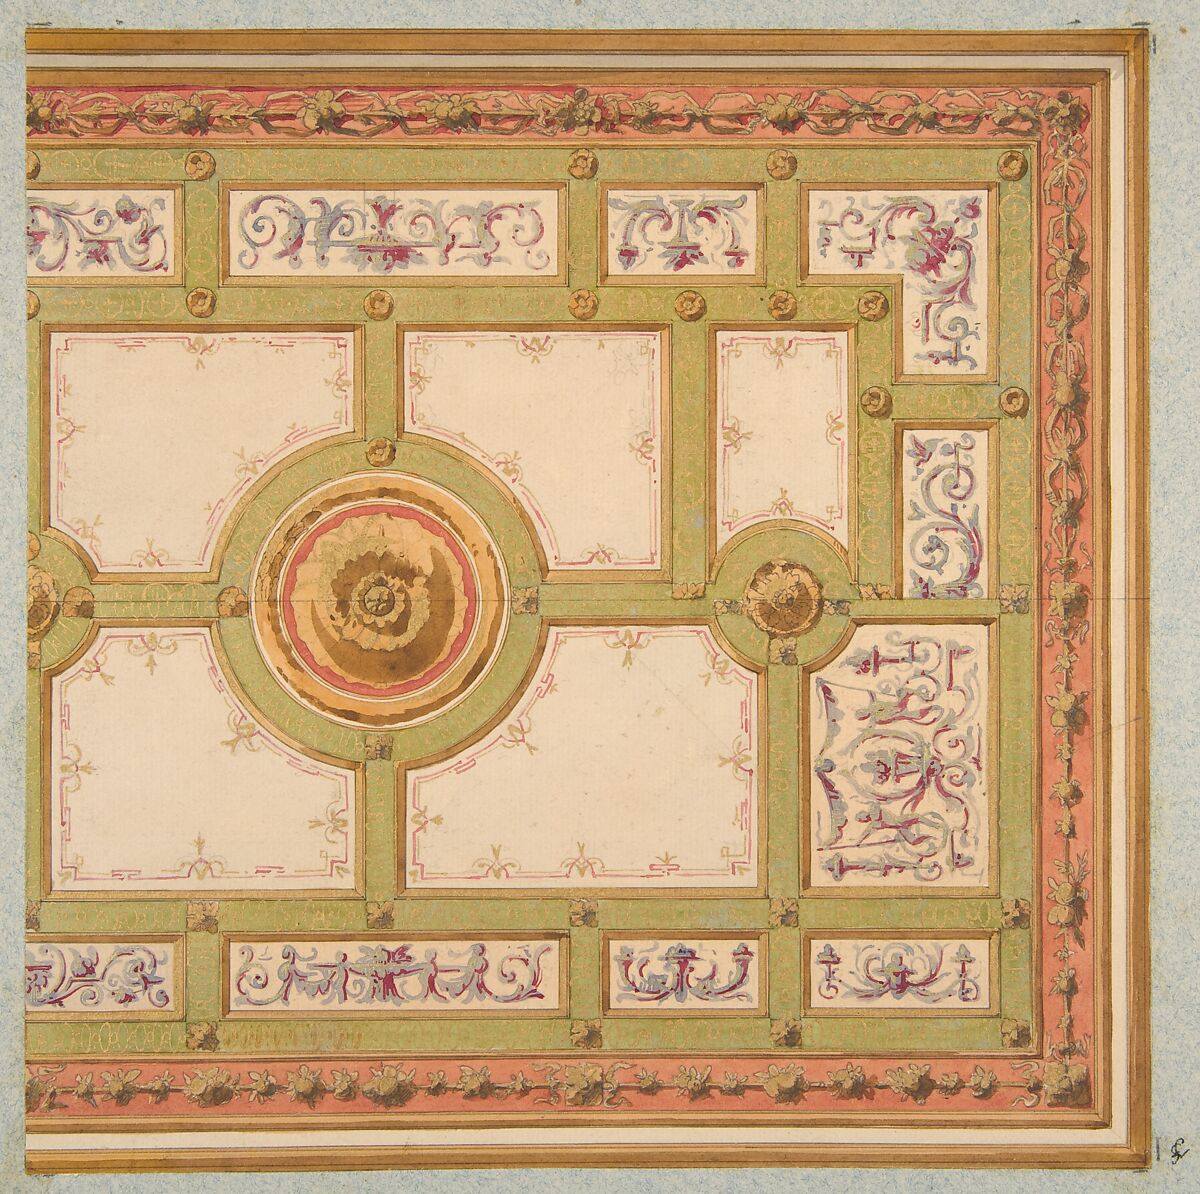 Alternative designs for the painted decoration of a ceiling, Jules-Edmond-Charles Lachaise (French, died 1897), Pen and ink, watercolor, and gold paint on laid paper; inlaid in blue wove paper 